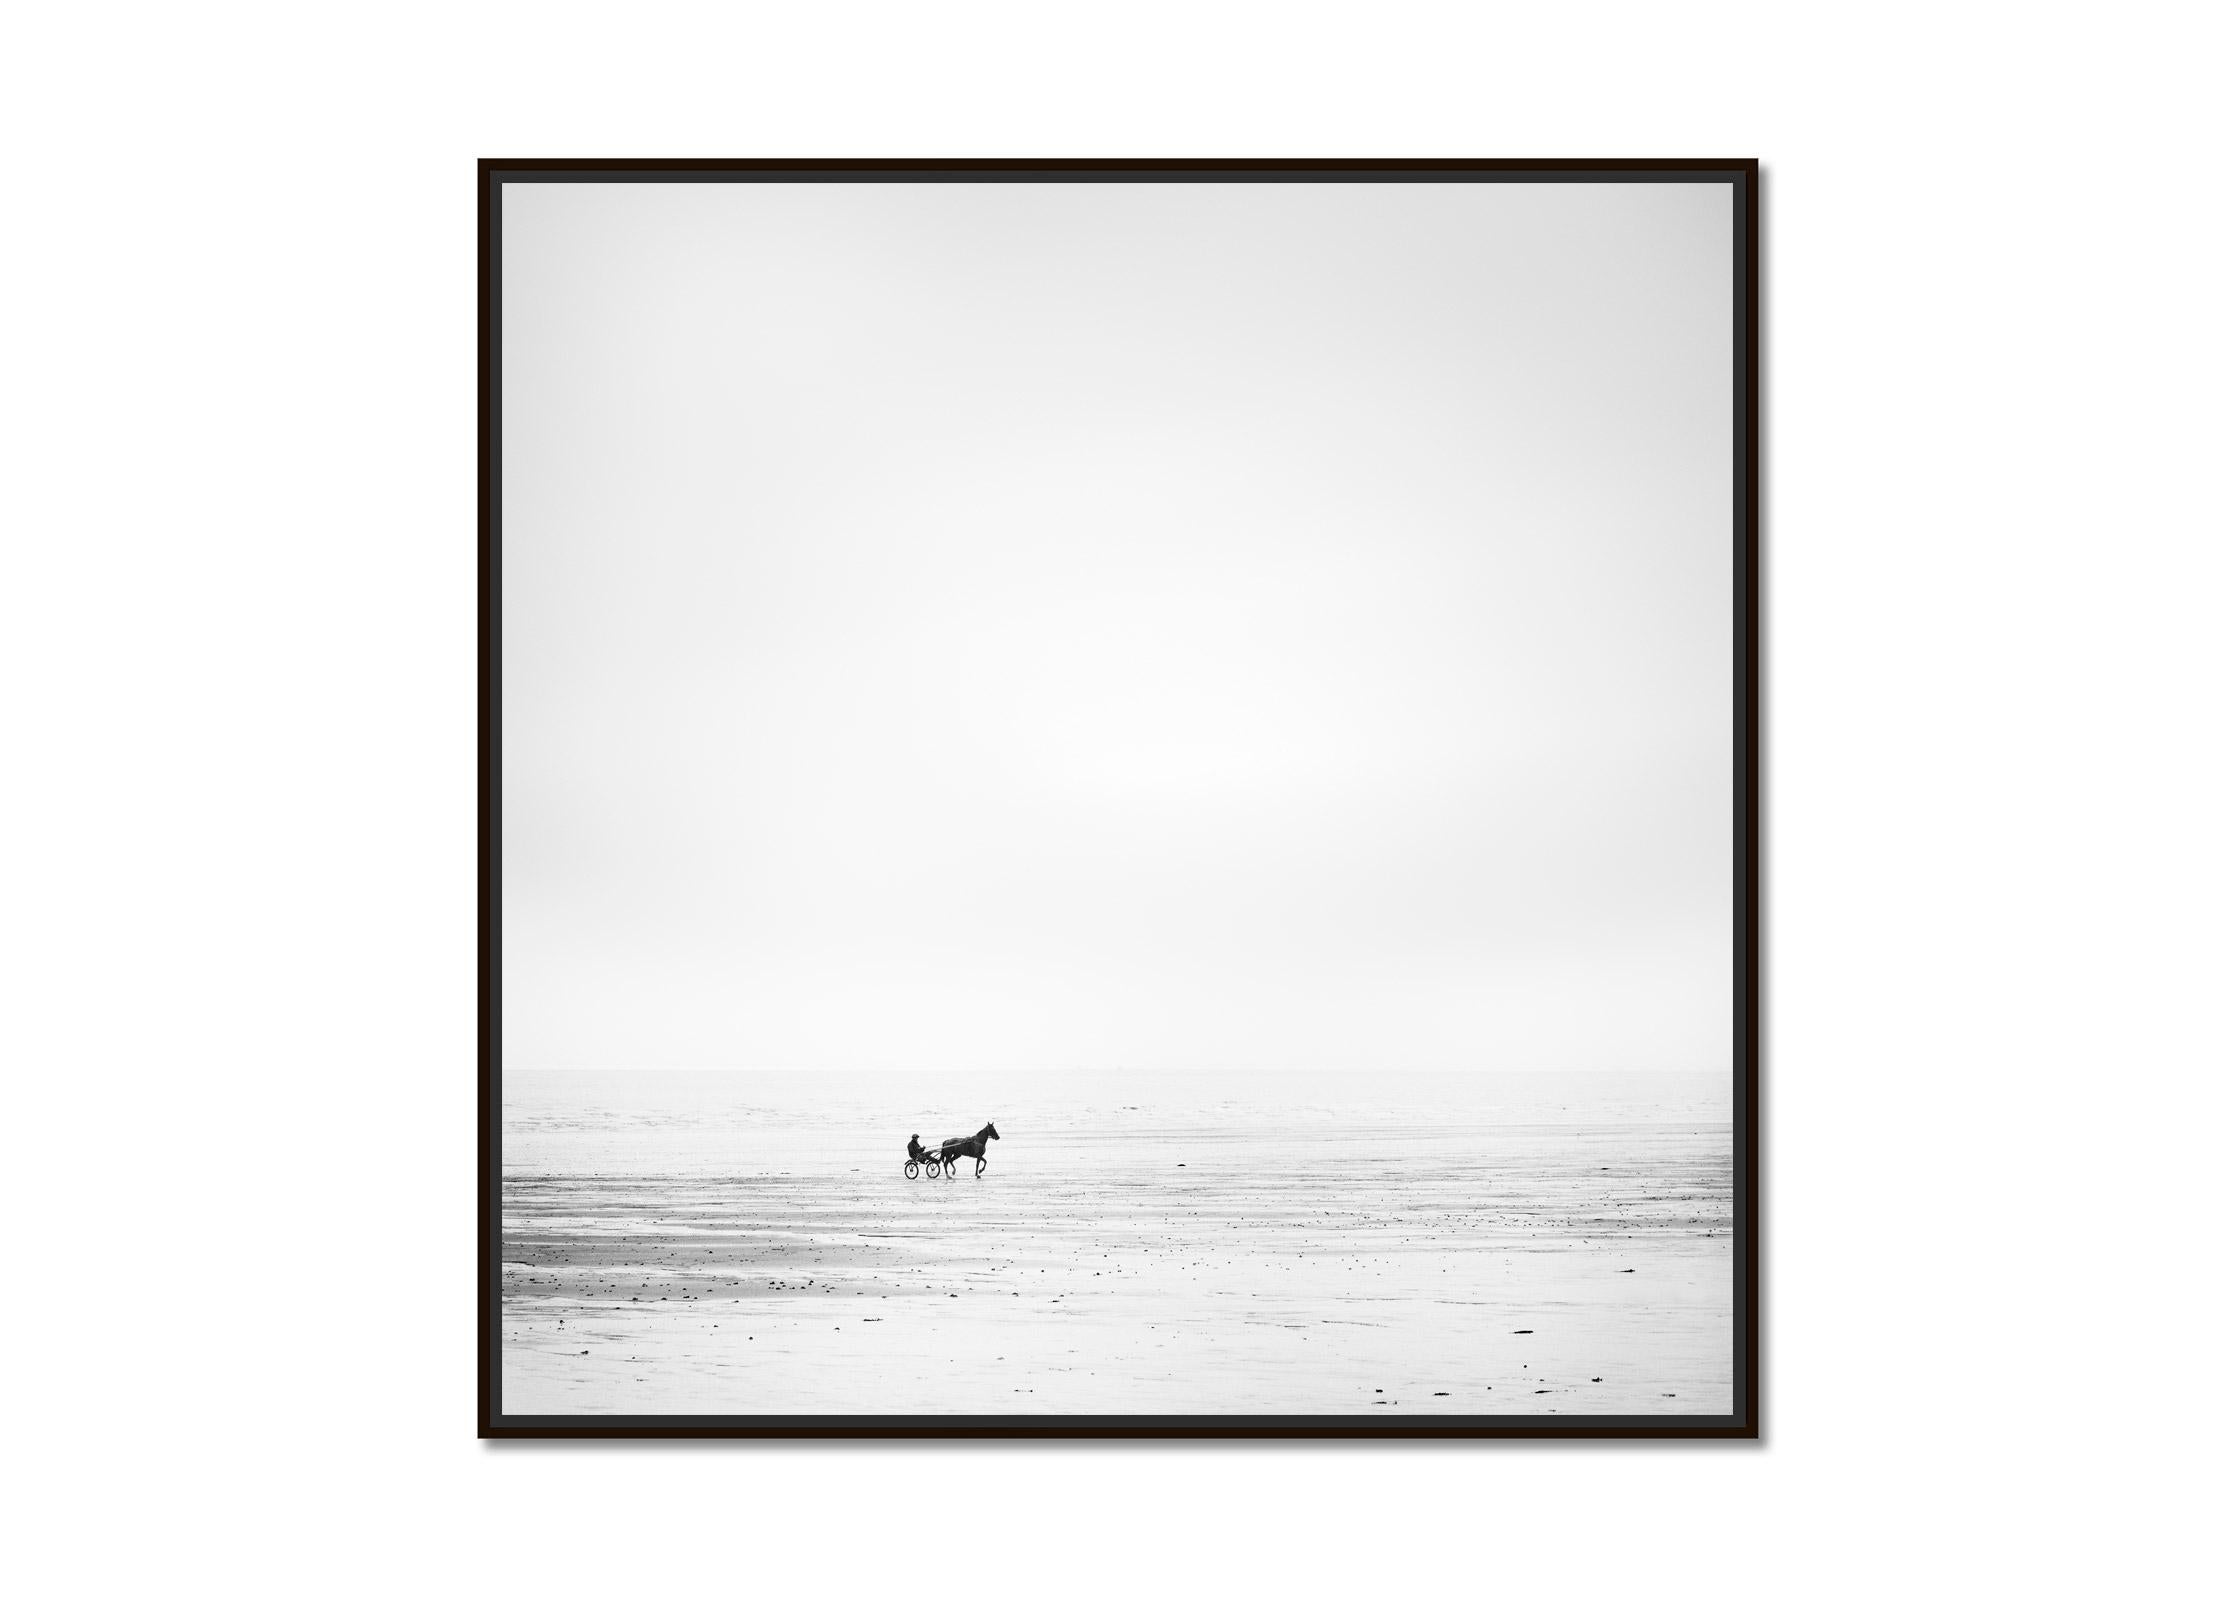 Harness Racing, lonely beach, horse, black and white photography, landscape, art - Photograph by Gerald Berghammer